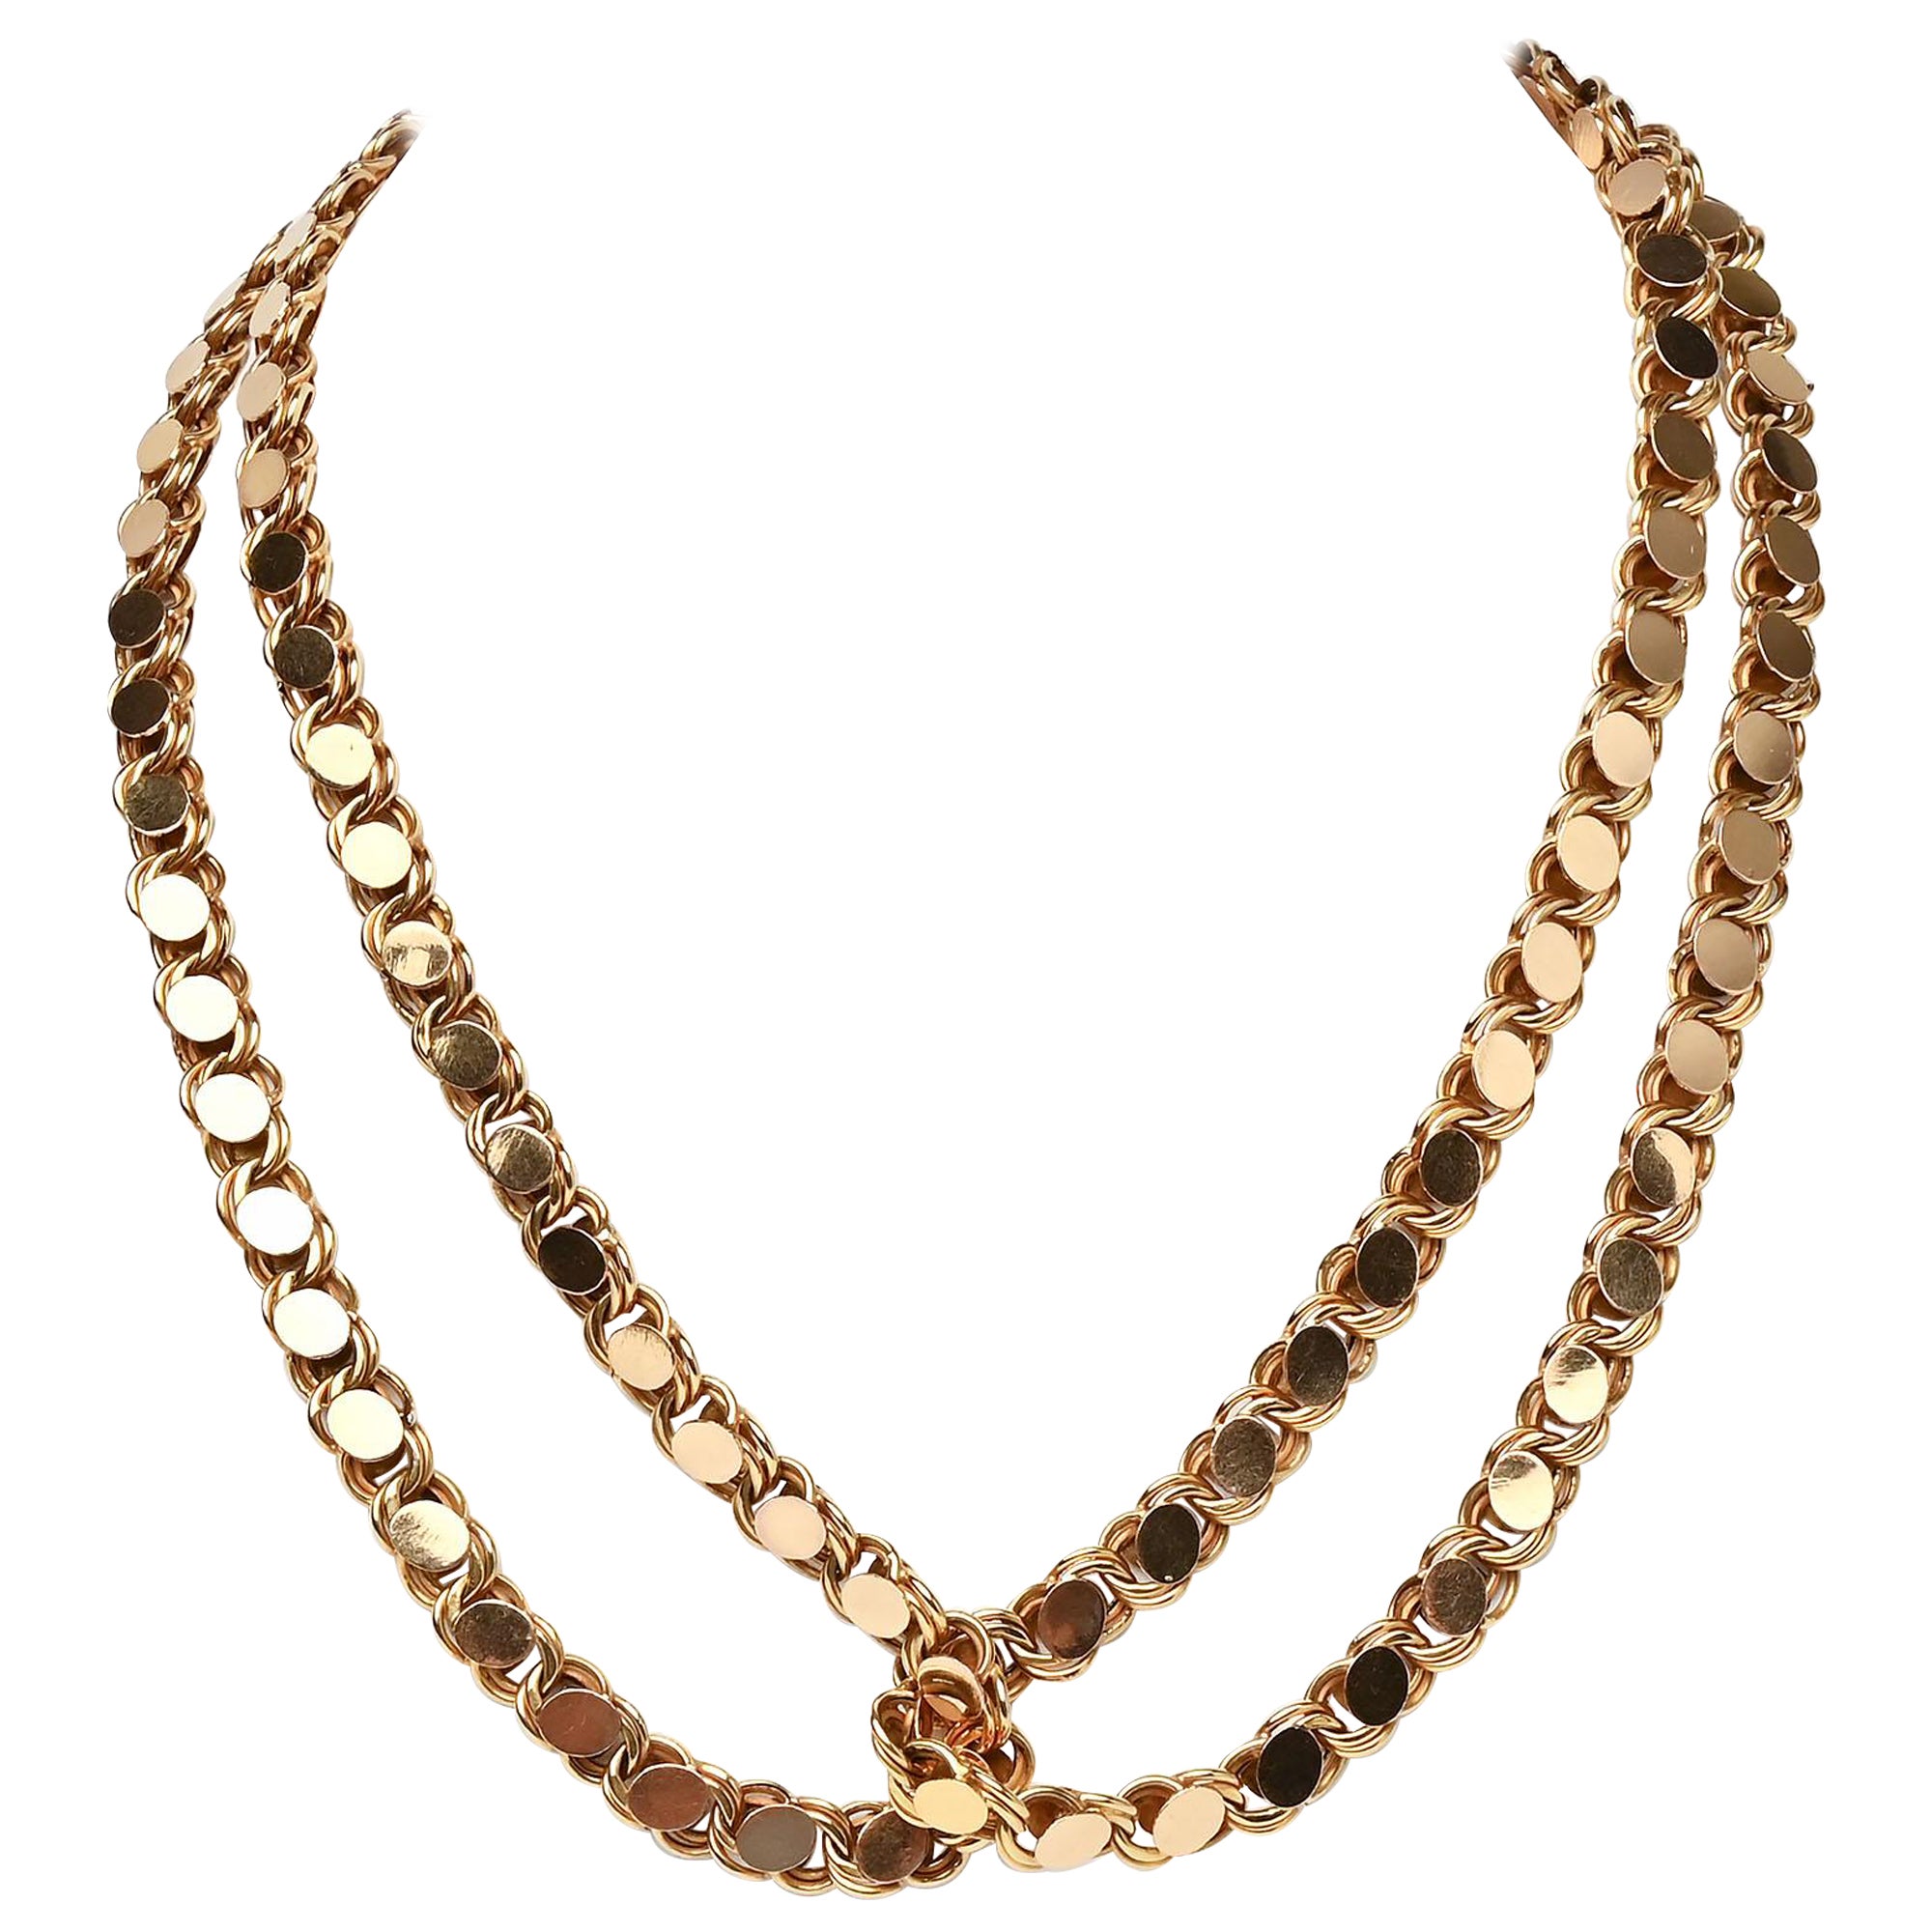 Very Long Handmade Gold Chain Necklace For Sale